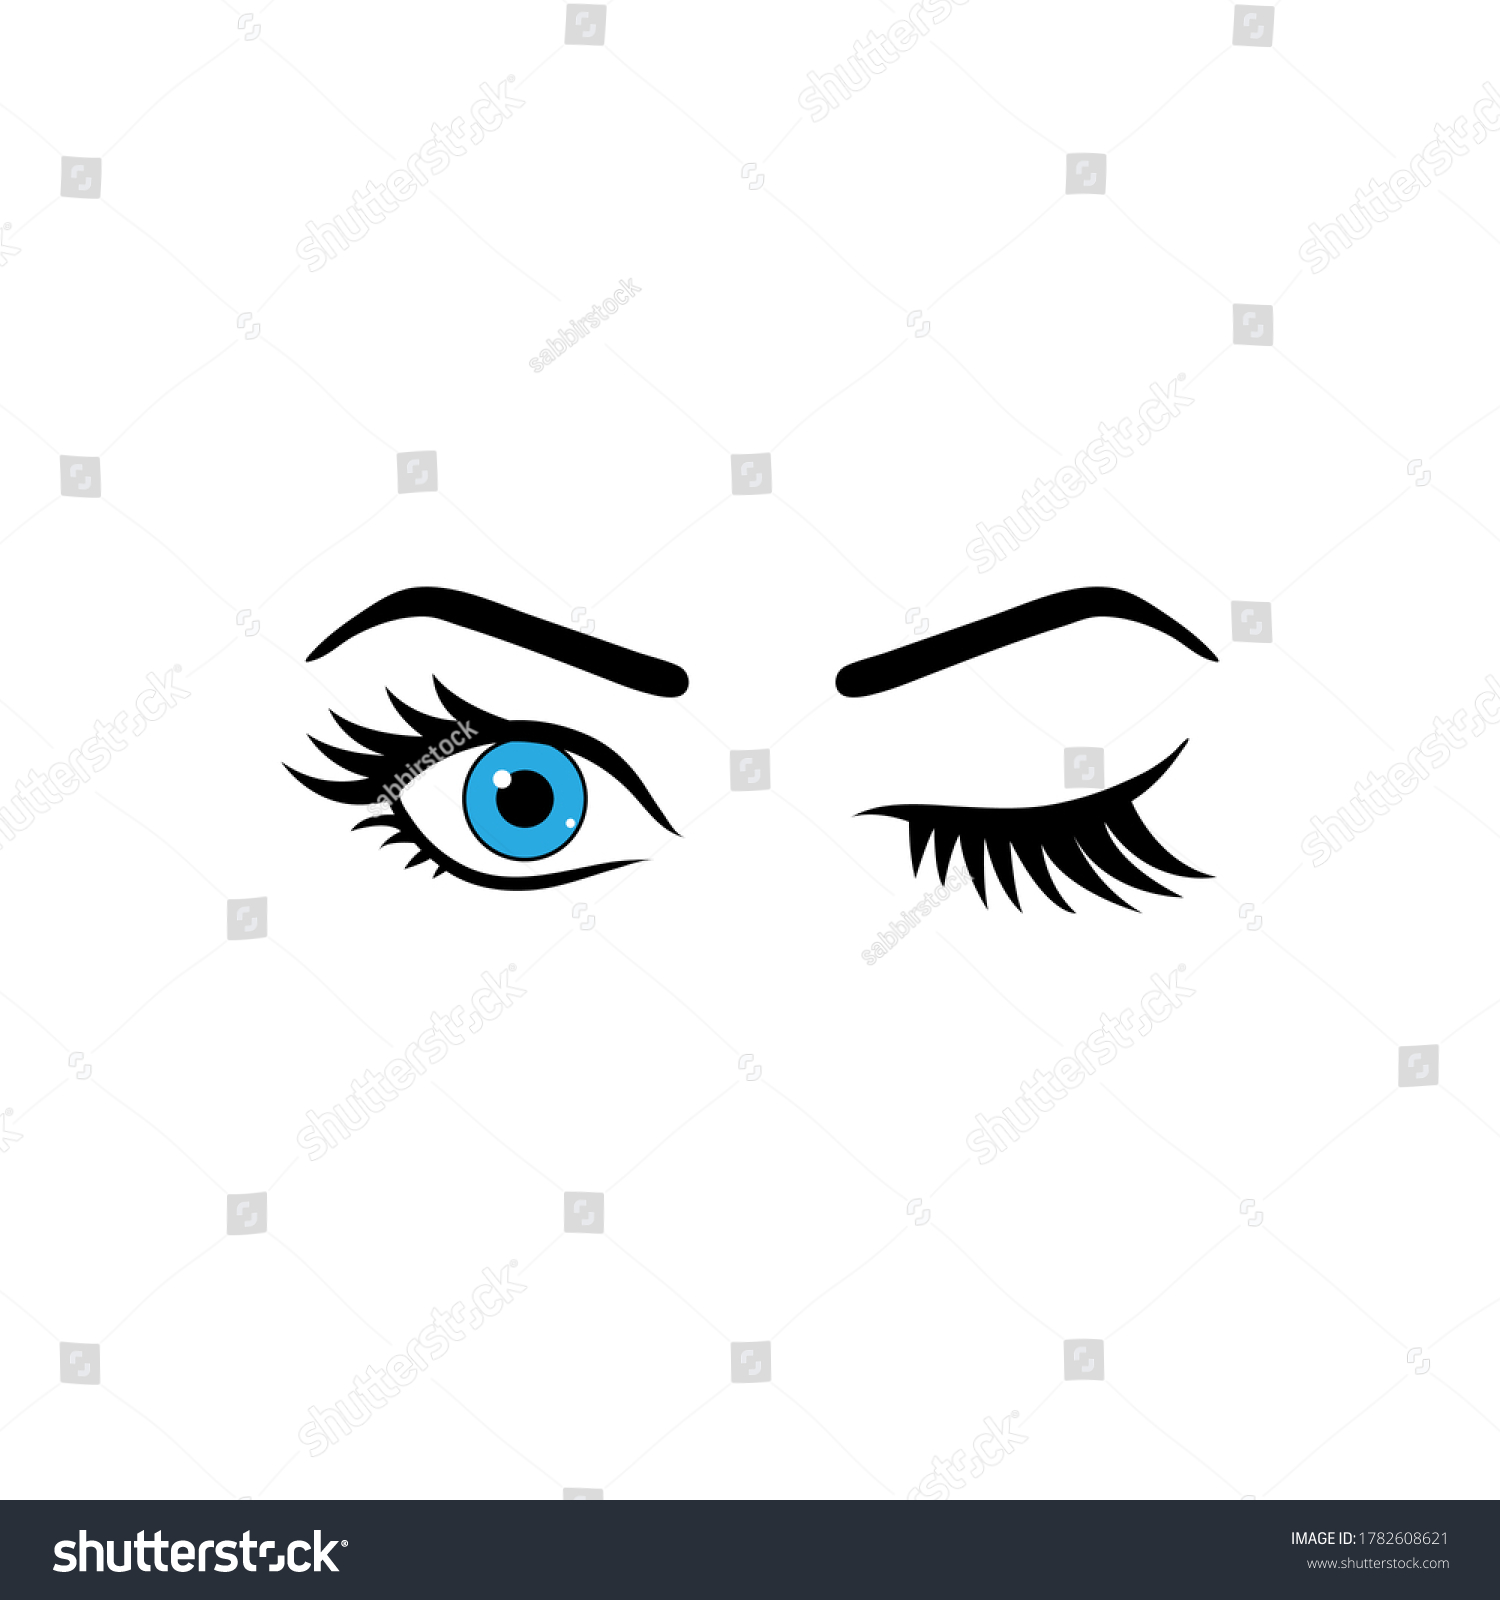 SVG of Blue Eye Winking.flat vector graphic in white background svg